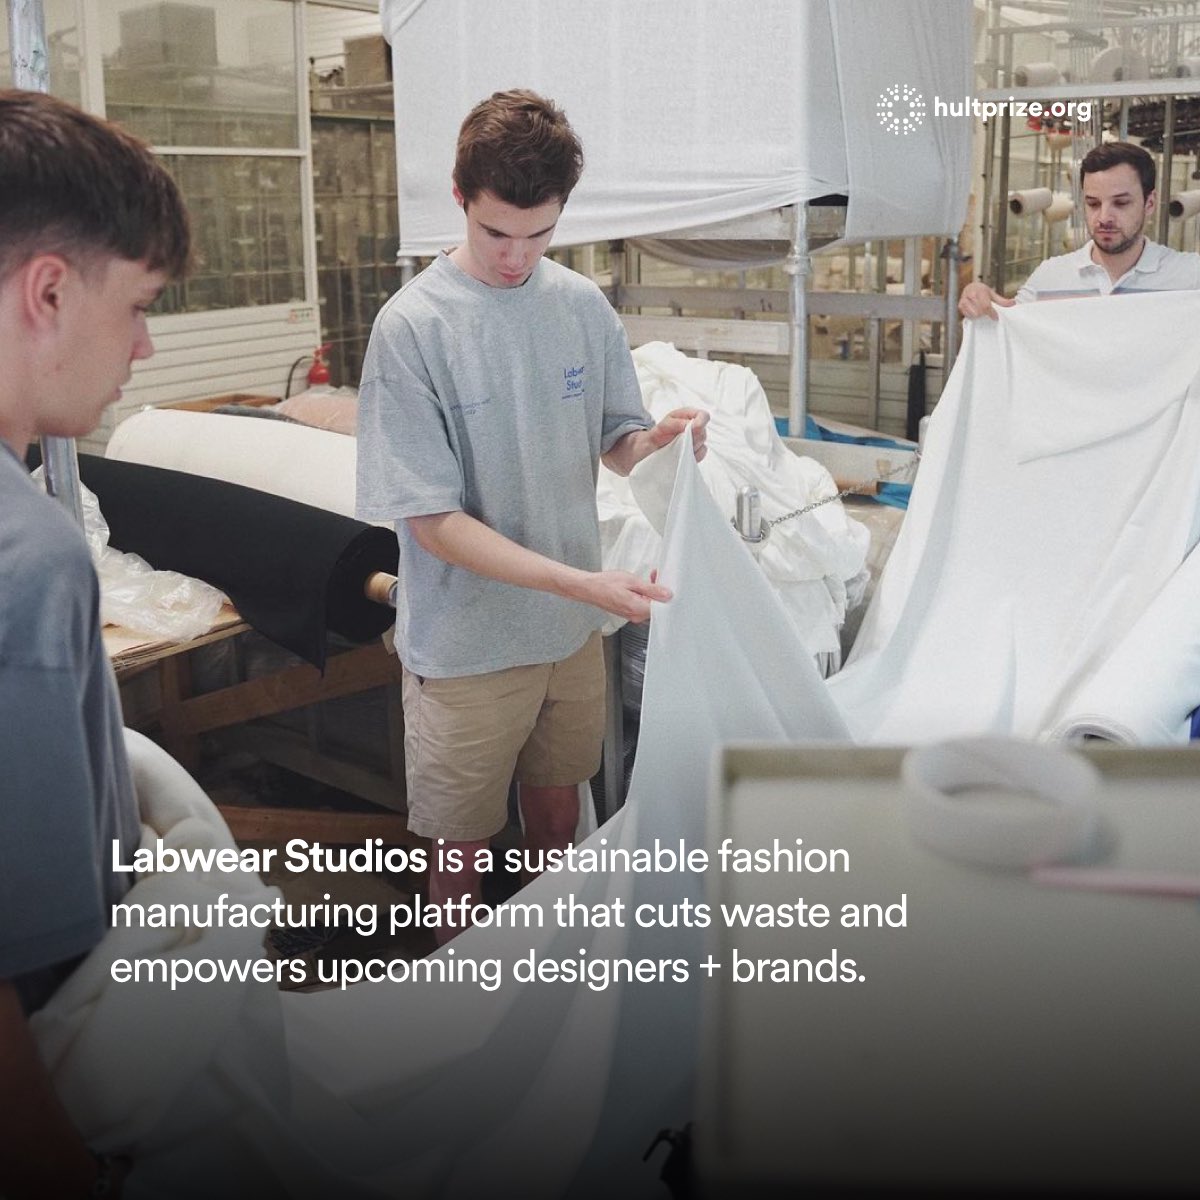 On this #ZeroWasteDay, we spotlight our Hult Prize alumni Labwear Studios 👕 Labwear ensures a circular lifecycle for their garments, making them environmentally friendly and sustainable! ♻️🌎 Learn more at labwearstudios.com 🤏🏼 #hultprize #ZeroWasteDay